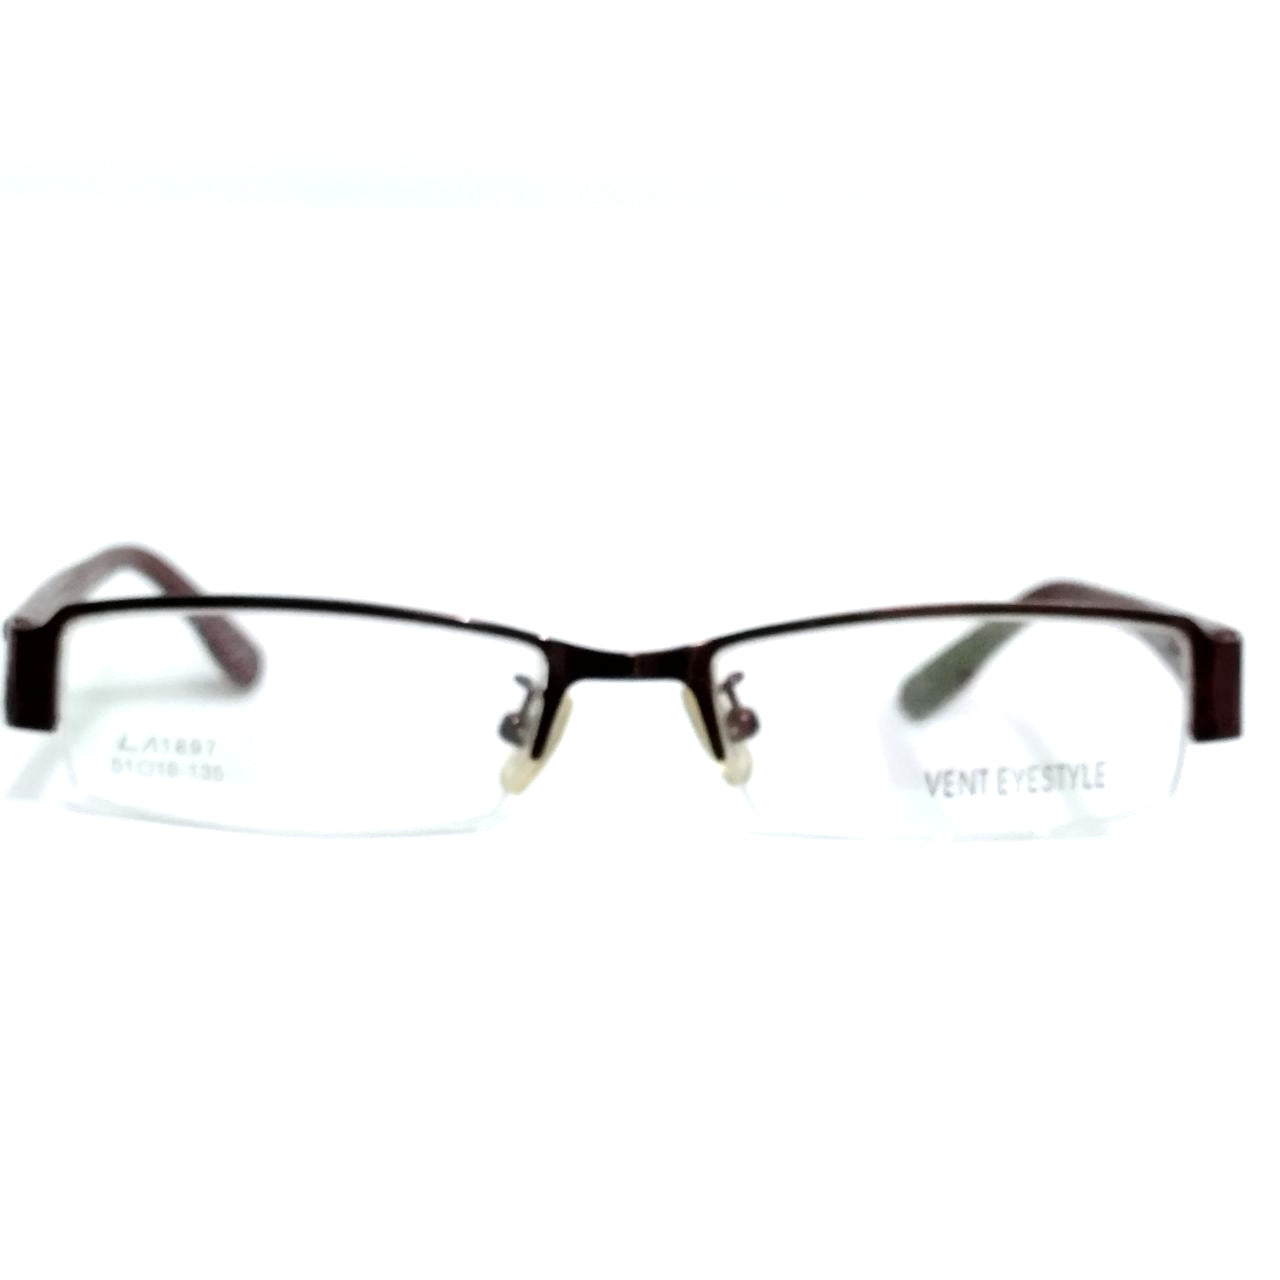 Wine Red Rectangle Supra Spectacle Frame Glasses LA1897